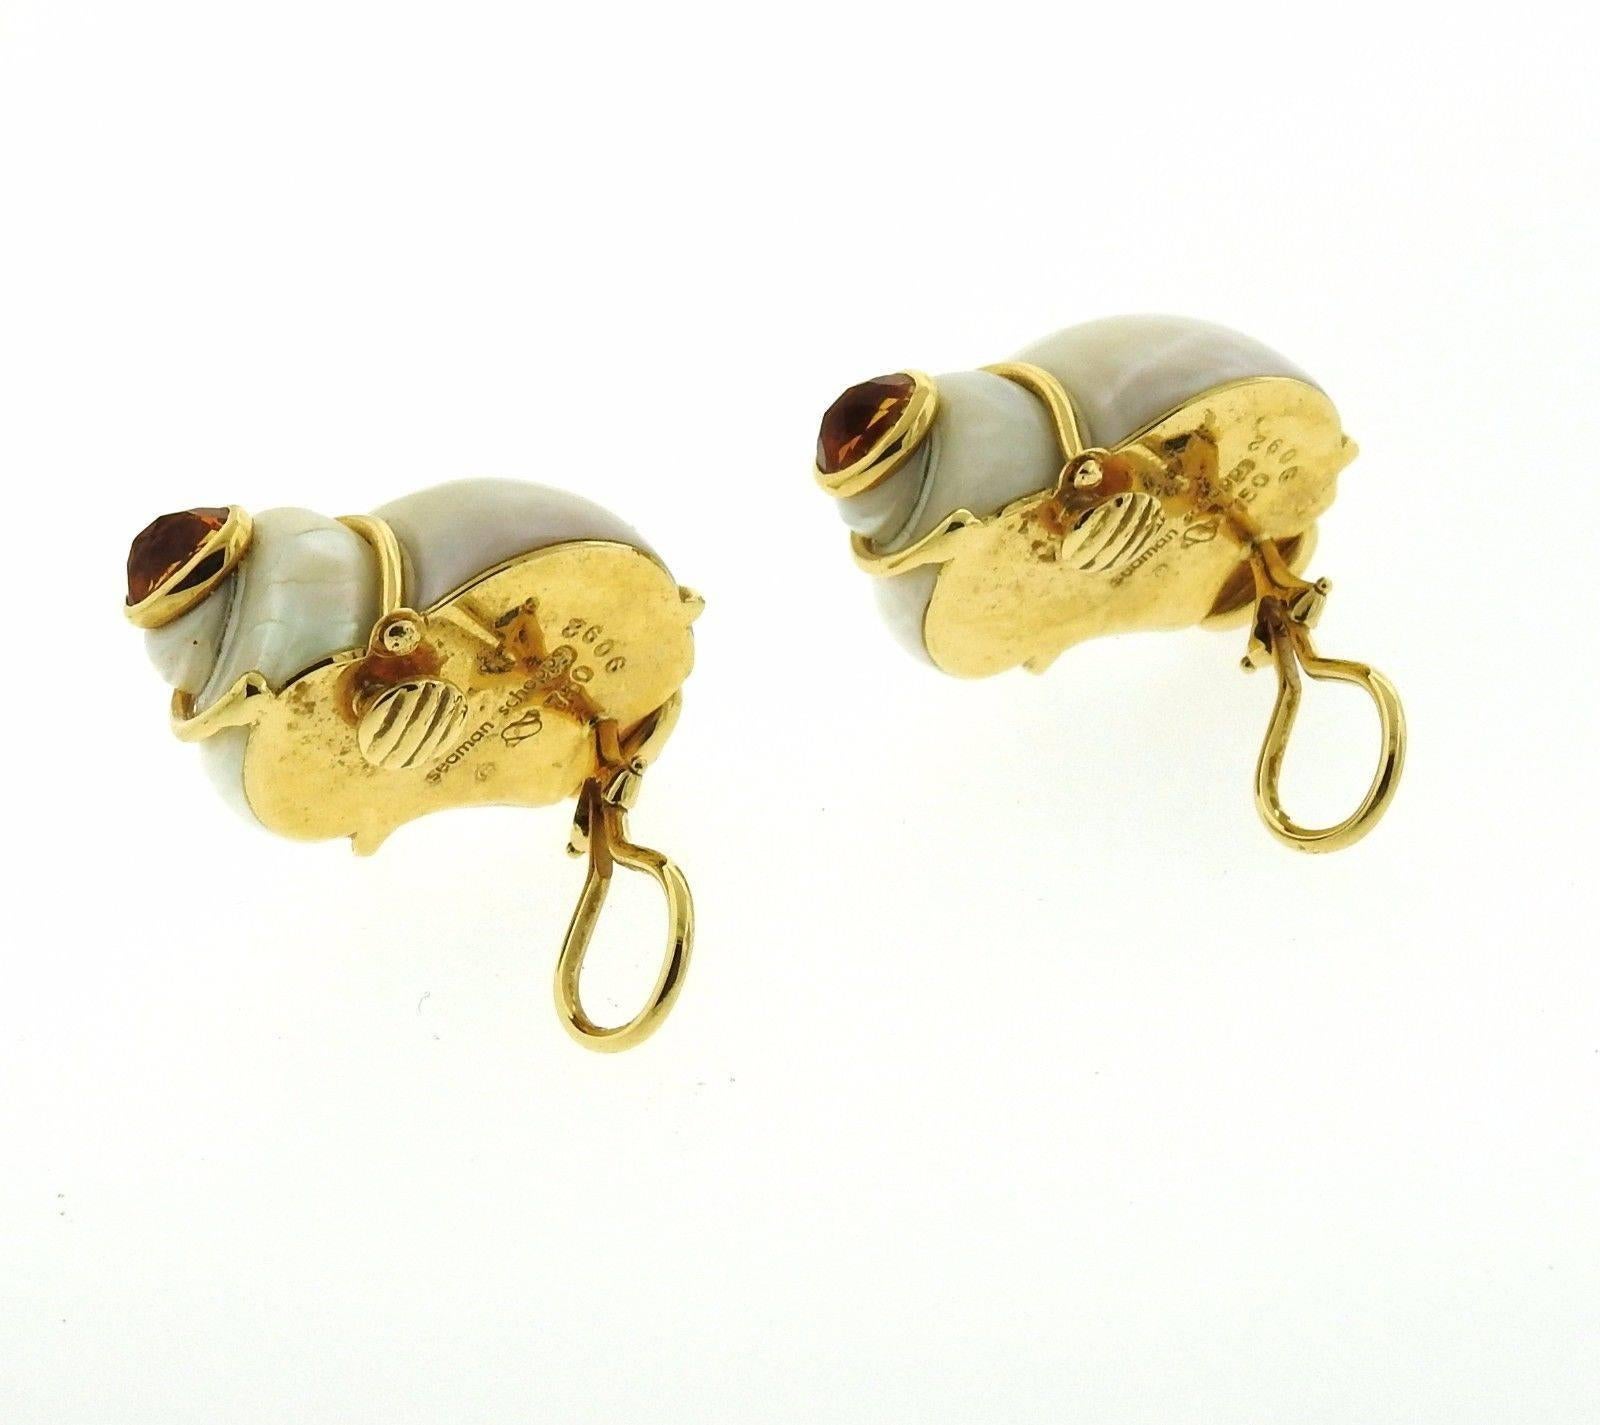 A pair of 18k yellow gold shell earrings set with citrines.  The earrings measure 30mm x 22mm and weigh 25.3 grams. Marked: Seaman Schepps, Shell mark, 9092, 750